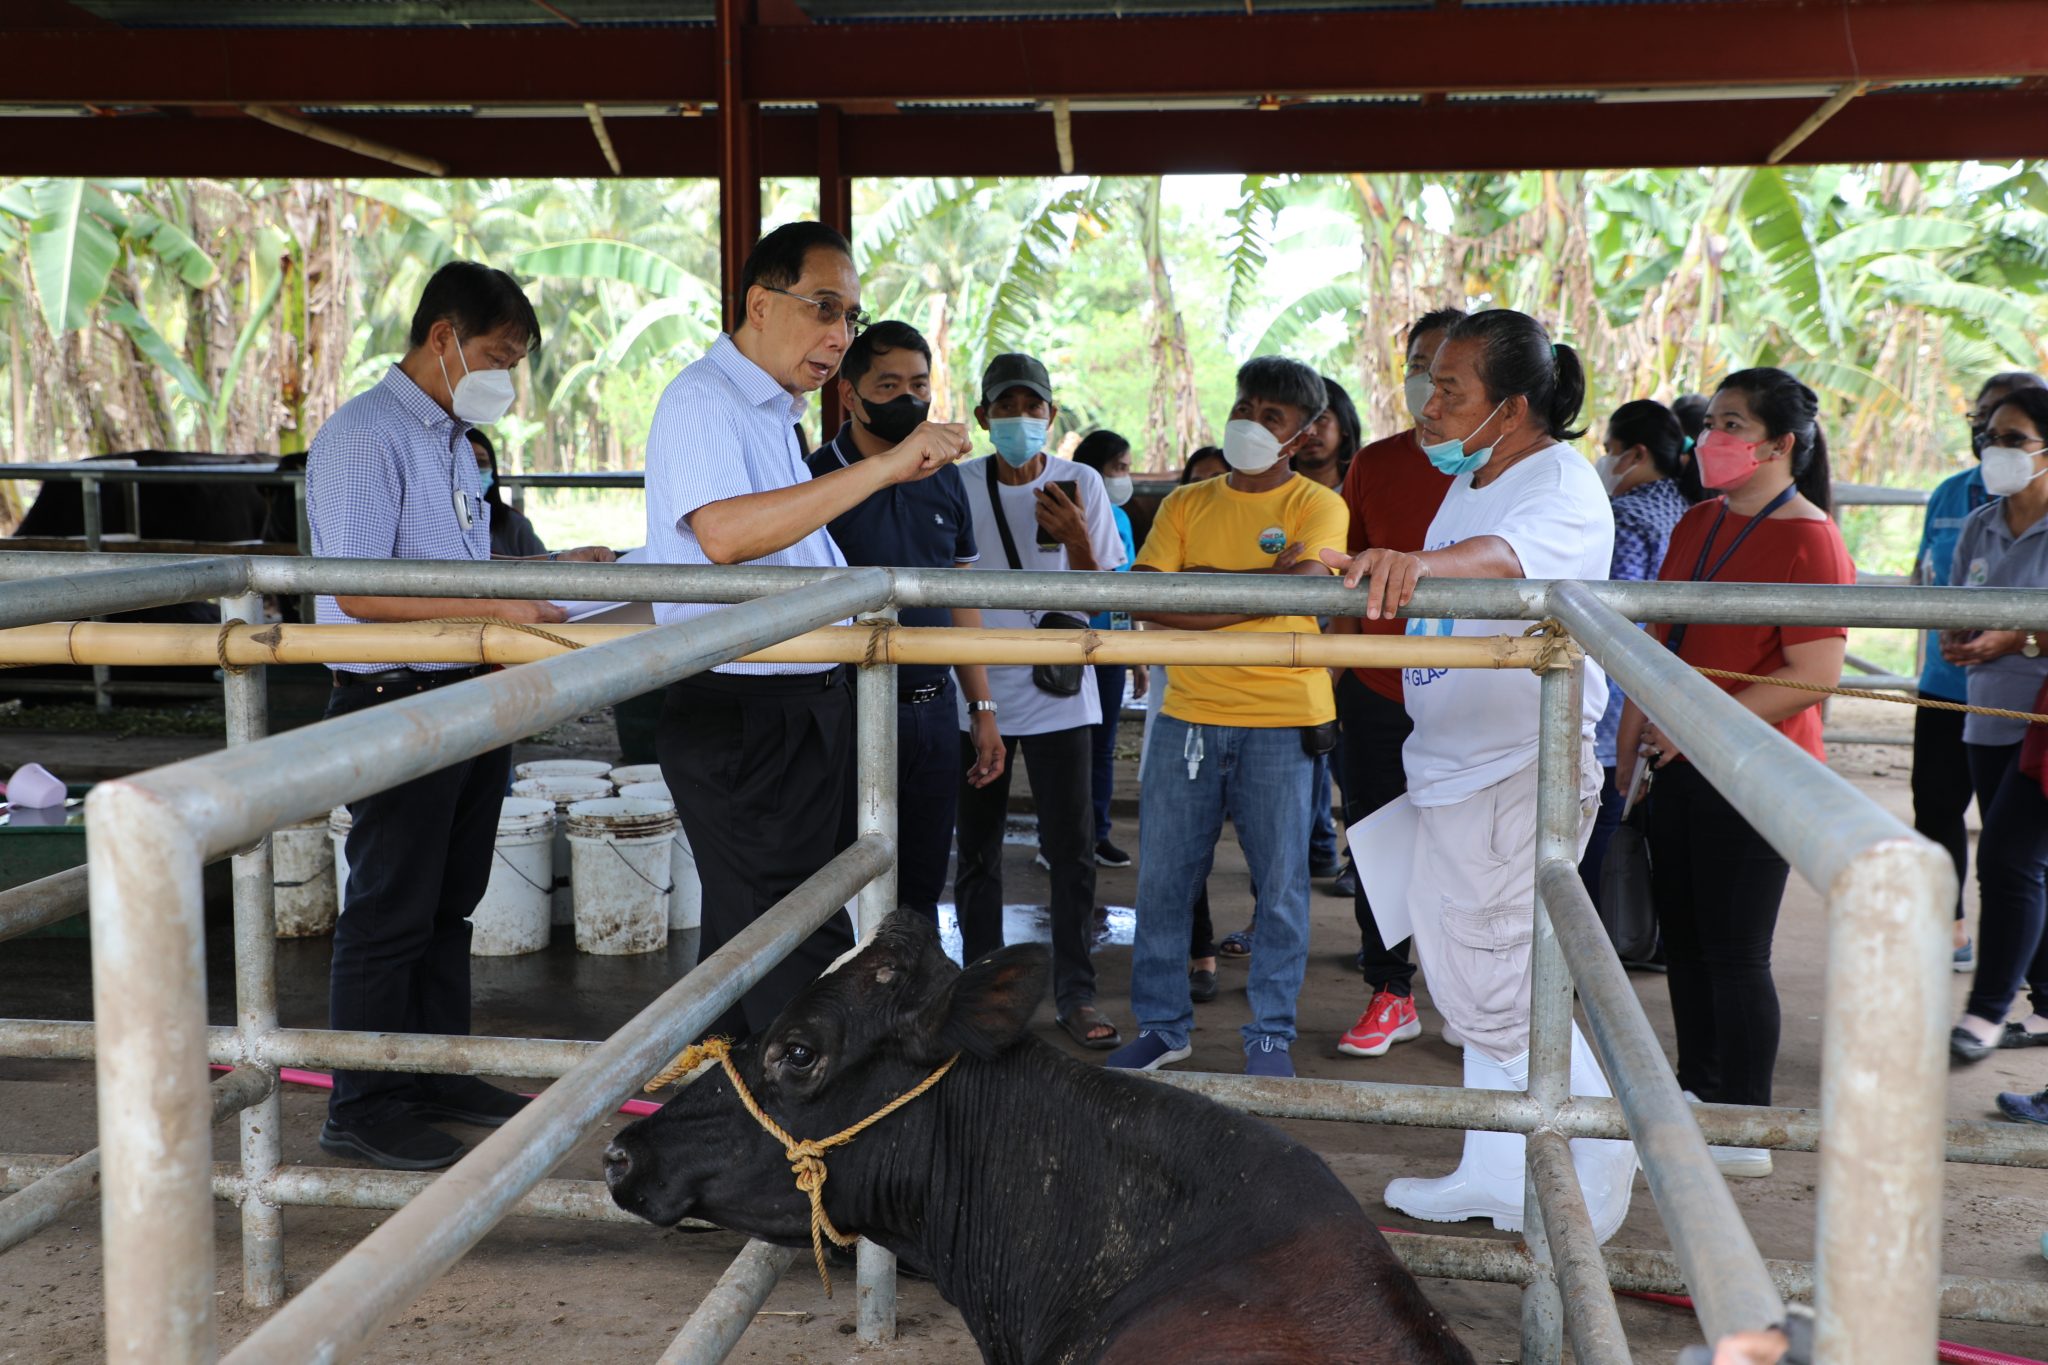 Sairaya dairy multiplier farm nearing completion, to improve CALABARZON dairy industry